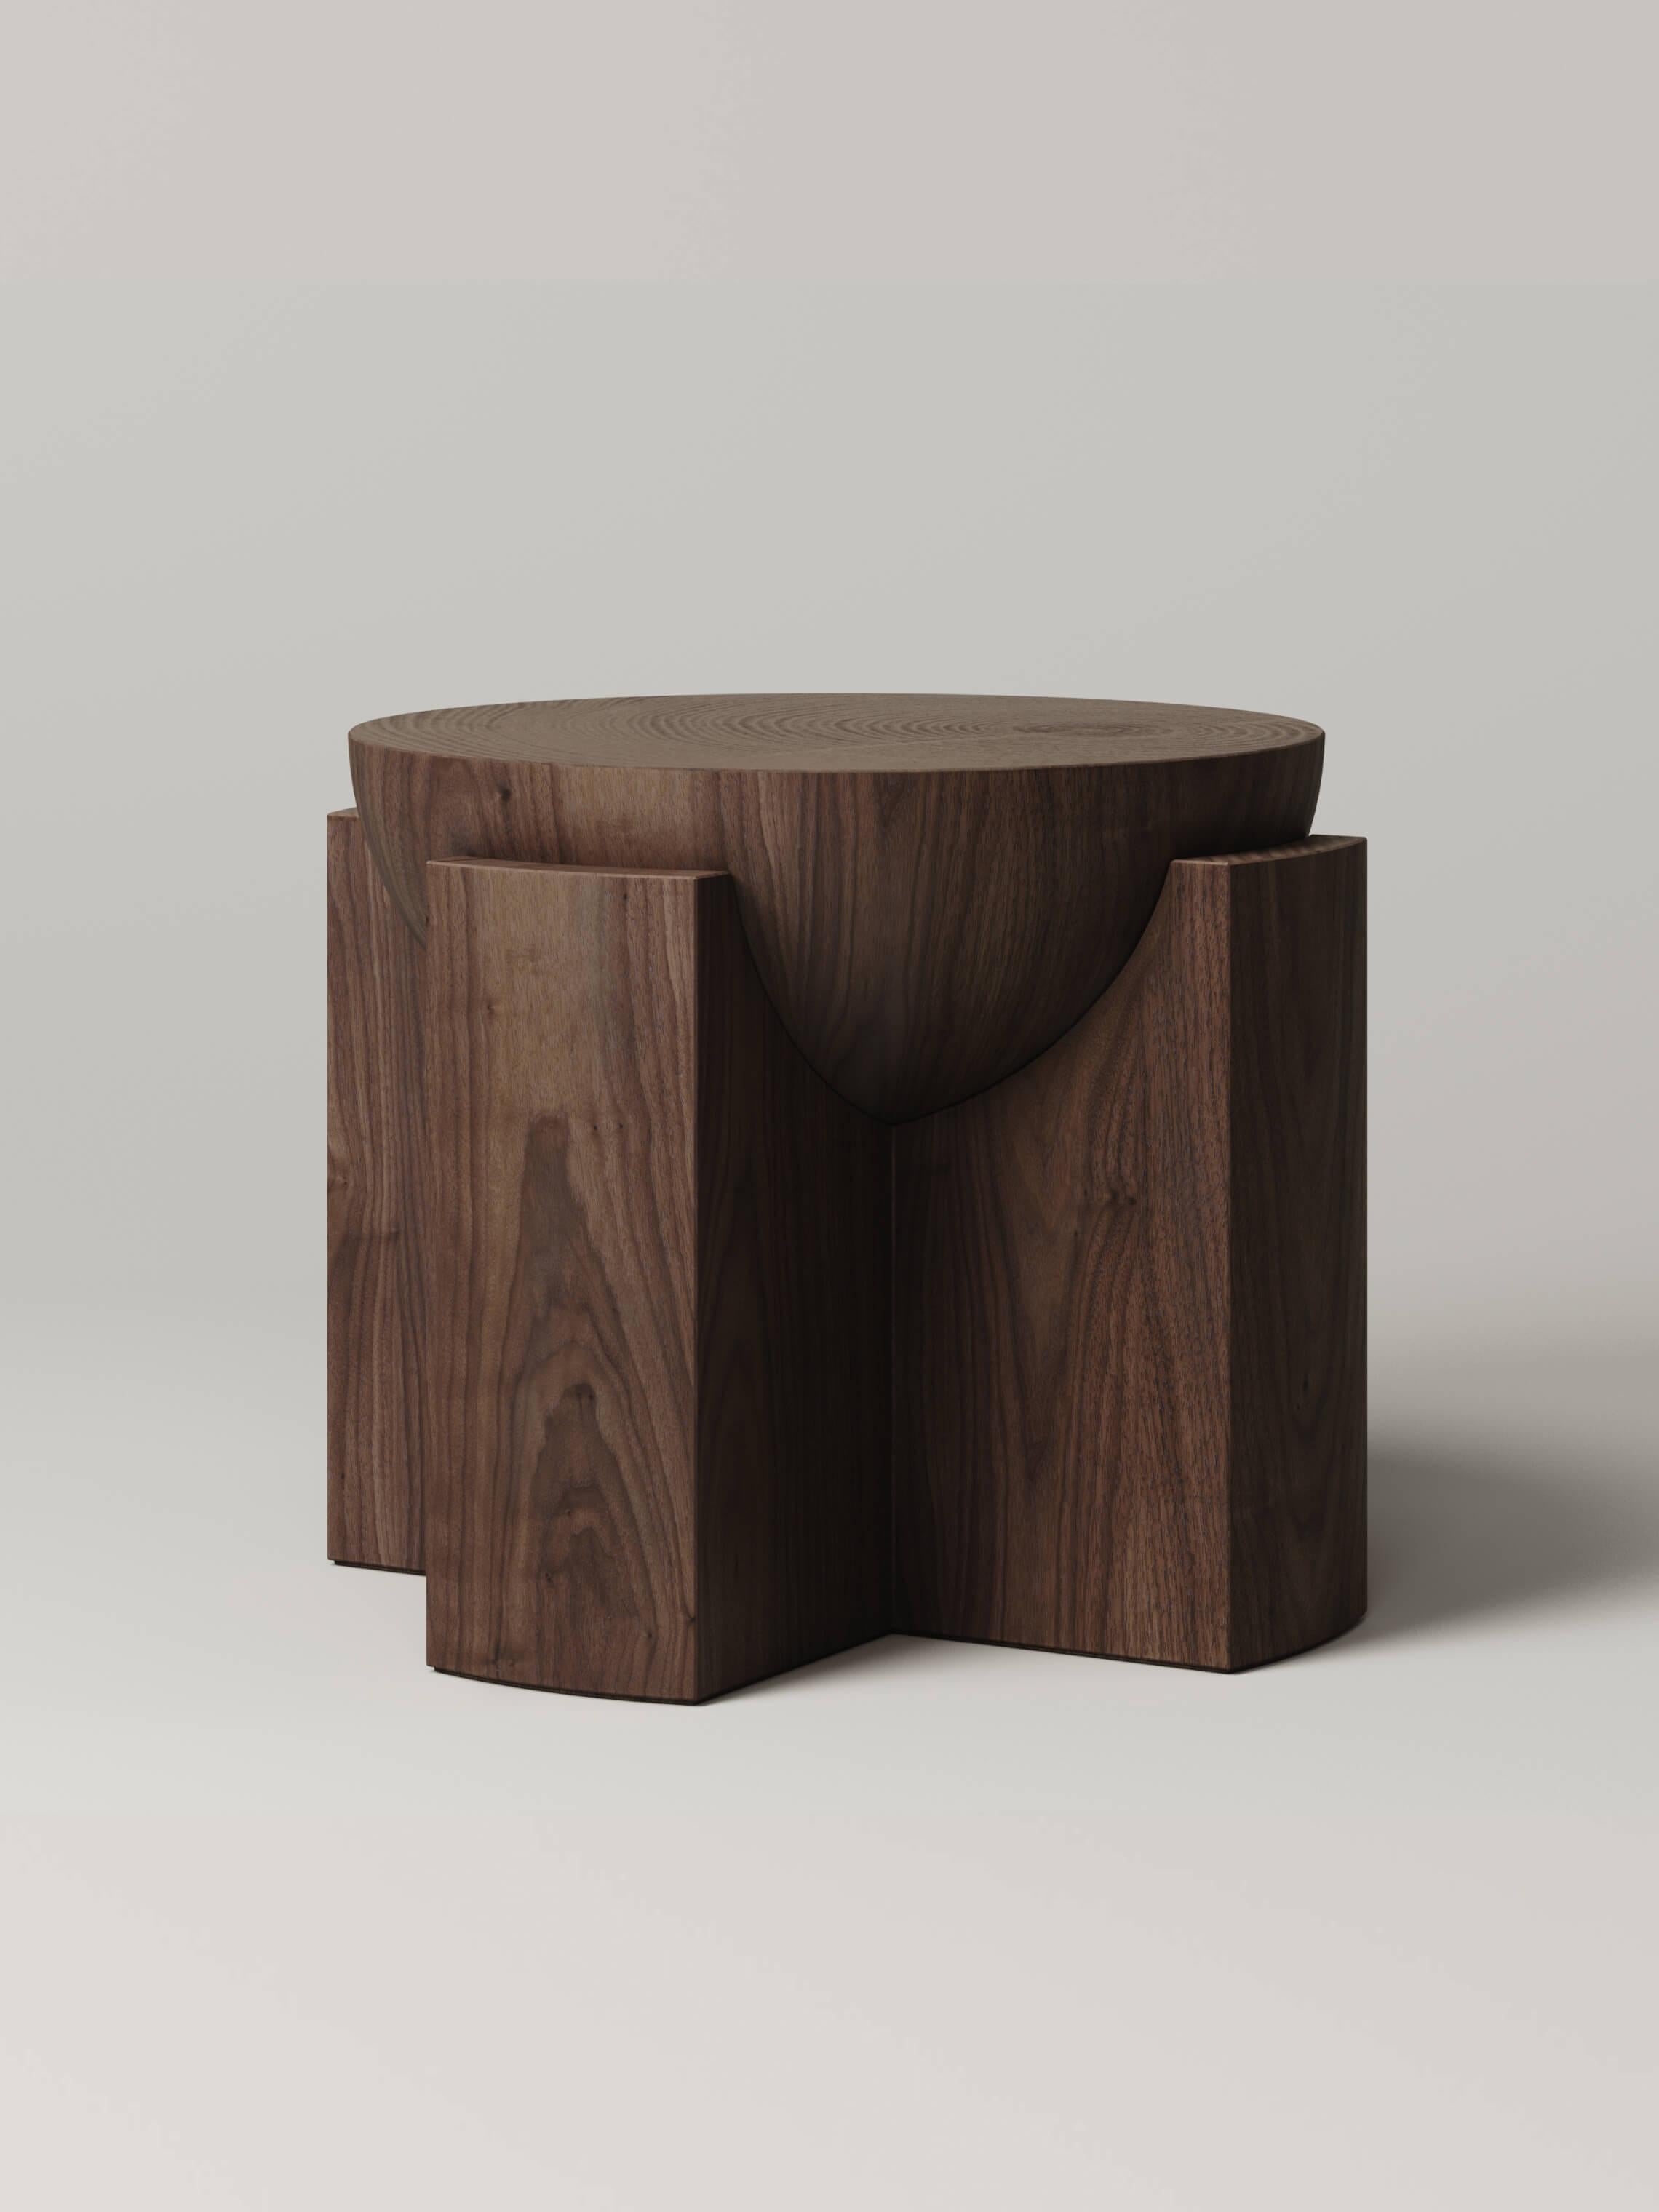 M_002 Side Table designed by Studio Le Cann for Monolith Studio, Travertine In New Condition For Sale In Brooklyn, NY